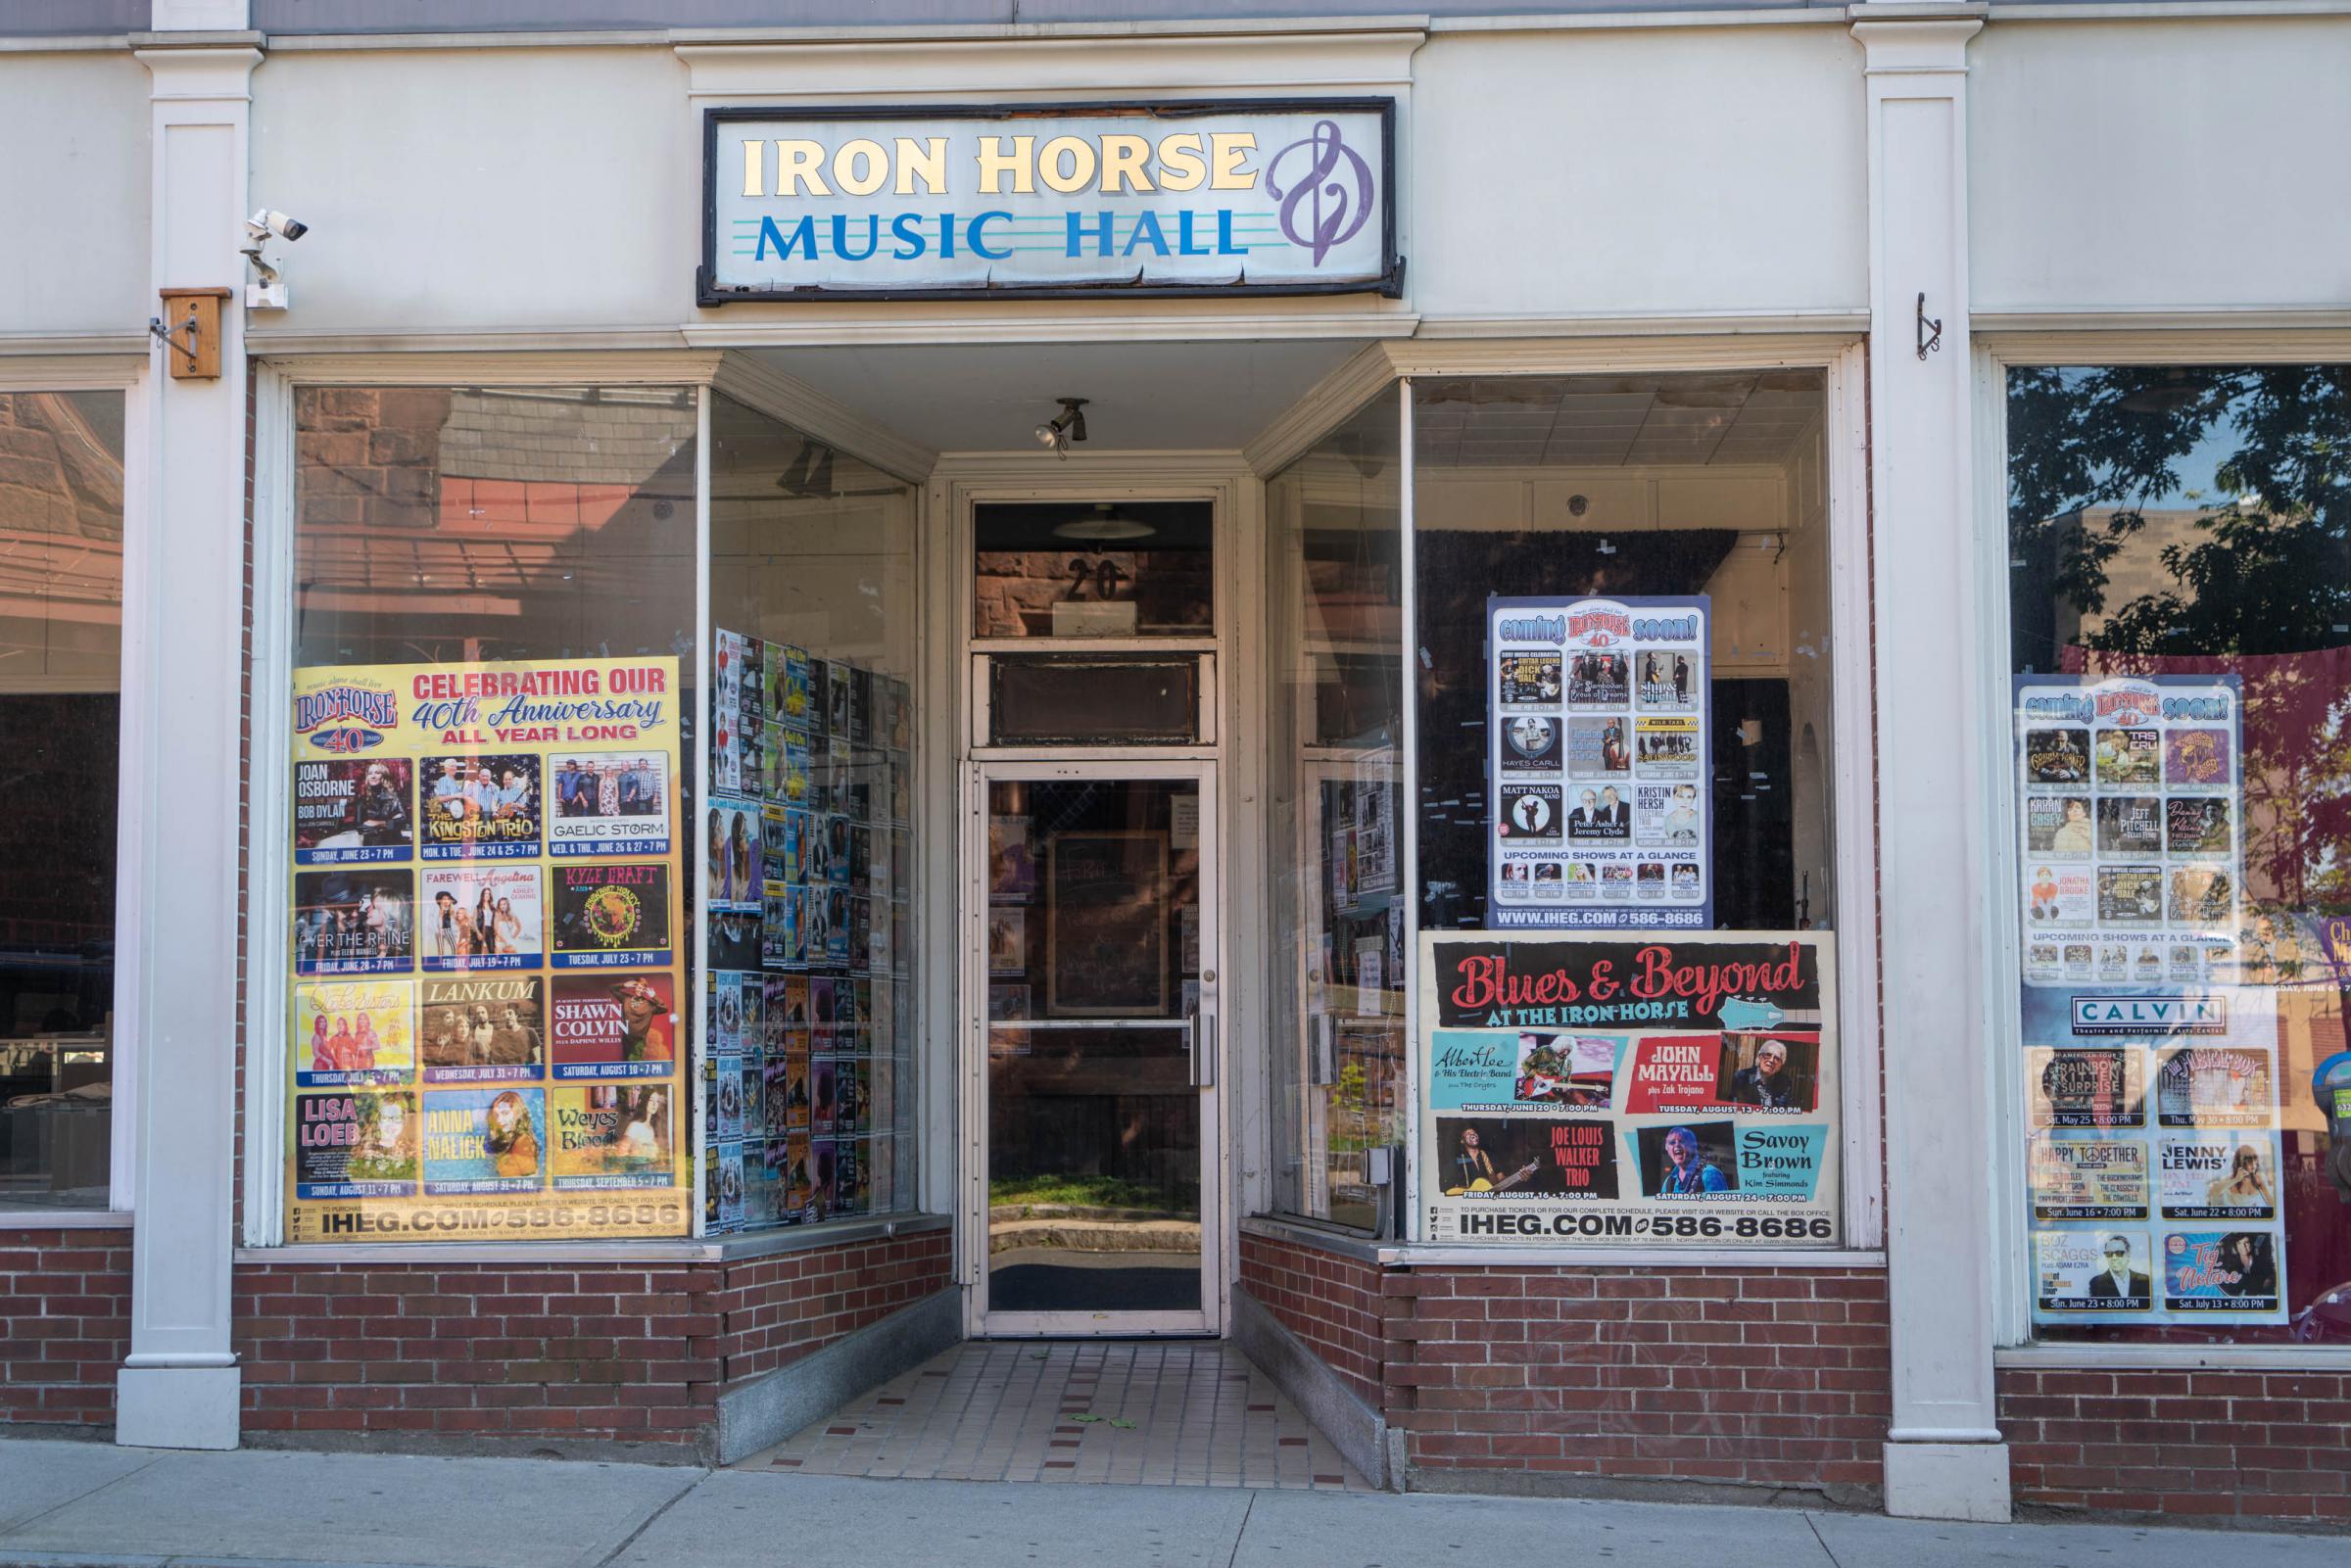 The entryway to the Iron Horse Music Hall at 20 Center Street in Northampton, Massachusetts. Photo by Ellery Berenger for NEPR